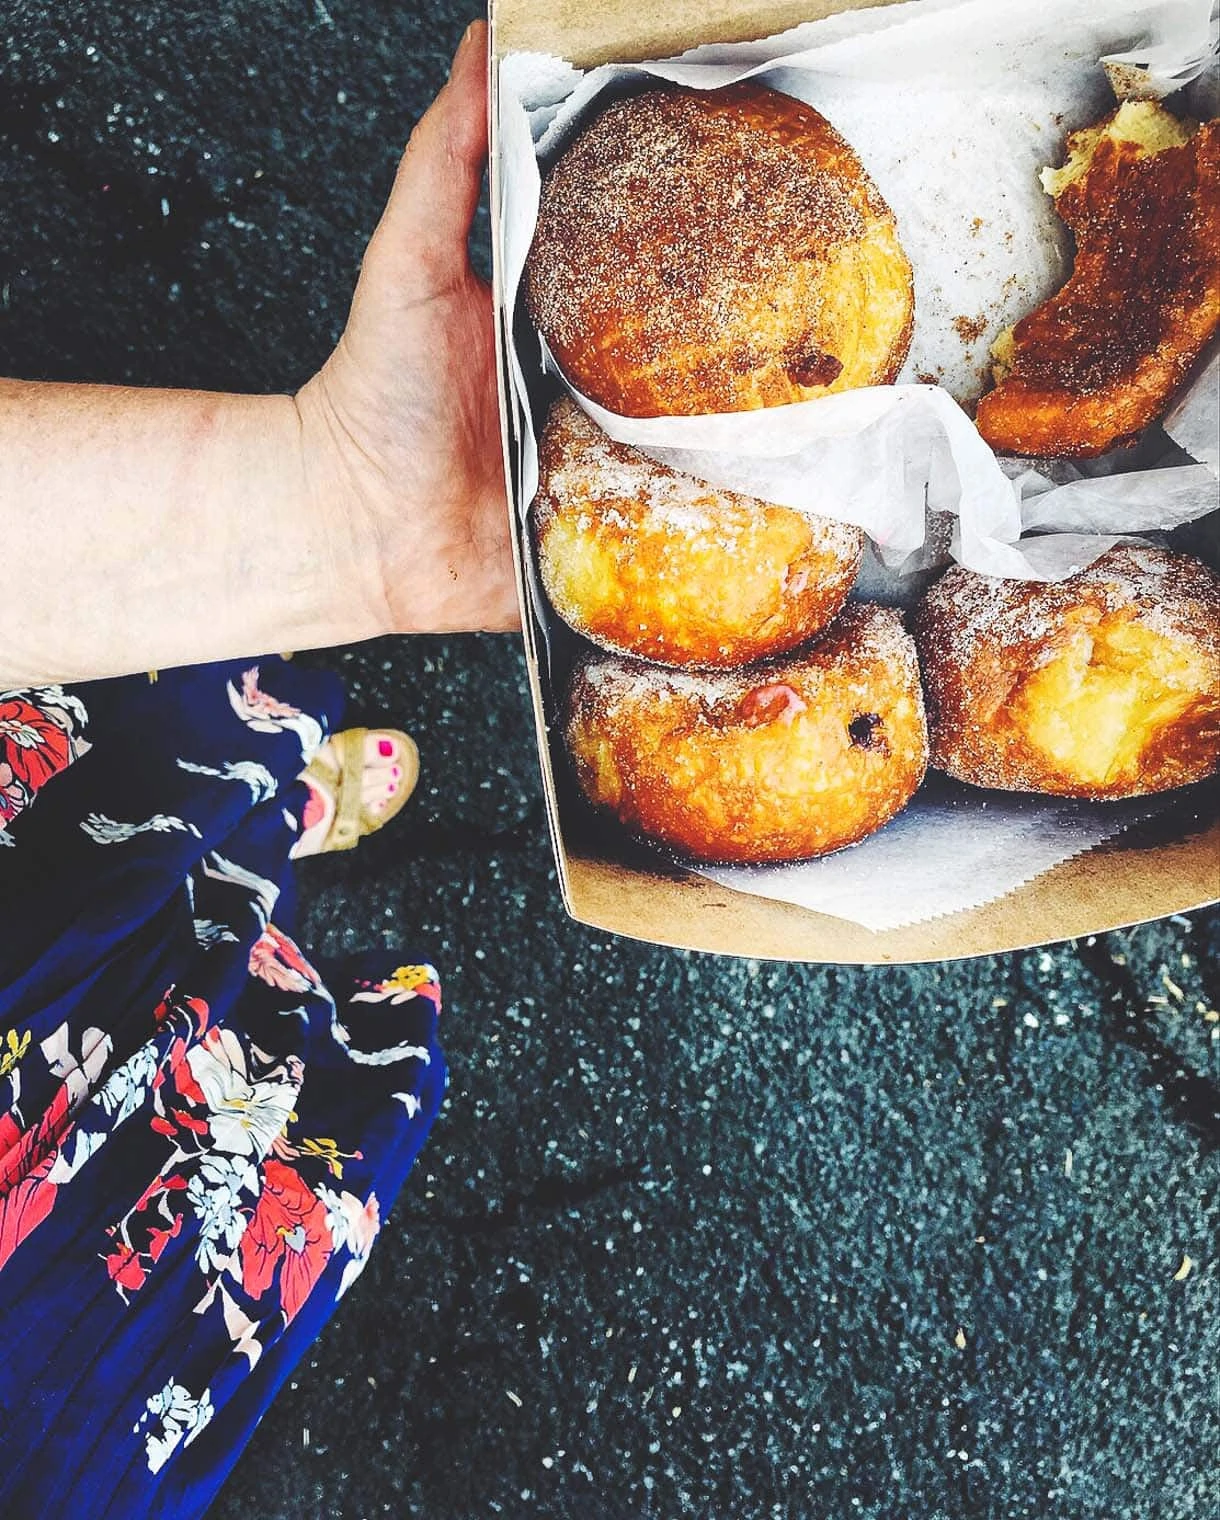 The Best Places To Eat In Oahu: Leonard's Bakery, Honolulu -- MALASADAS {portugese donuts}